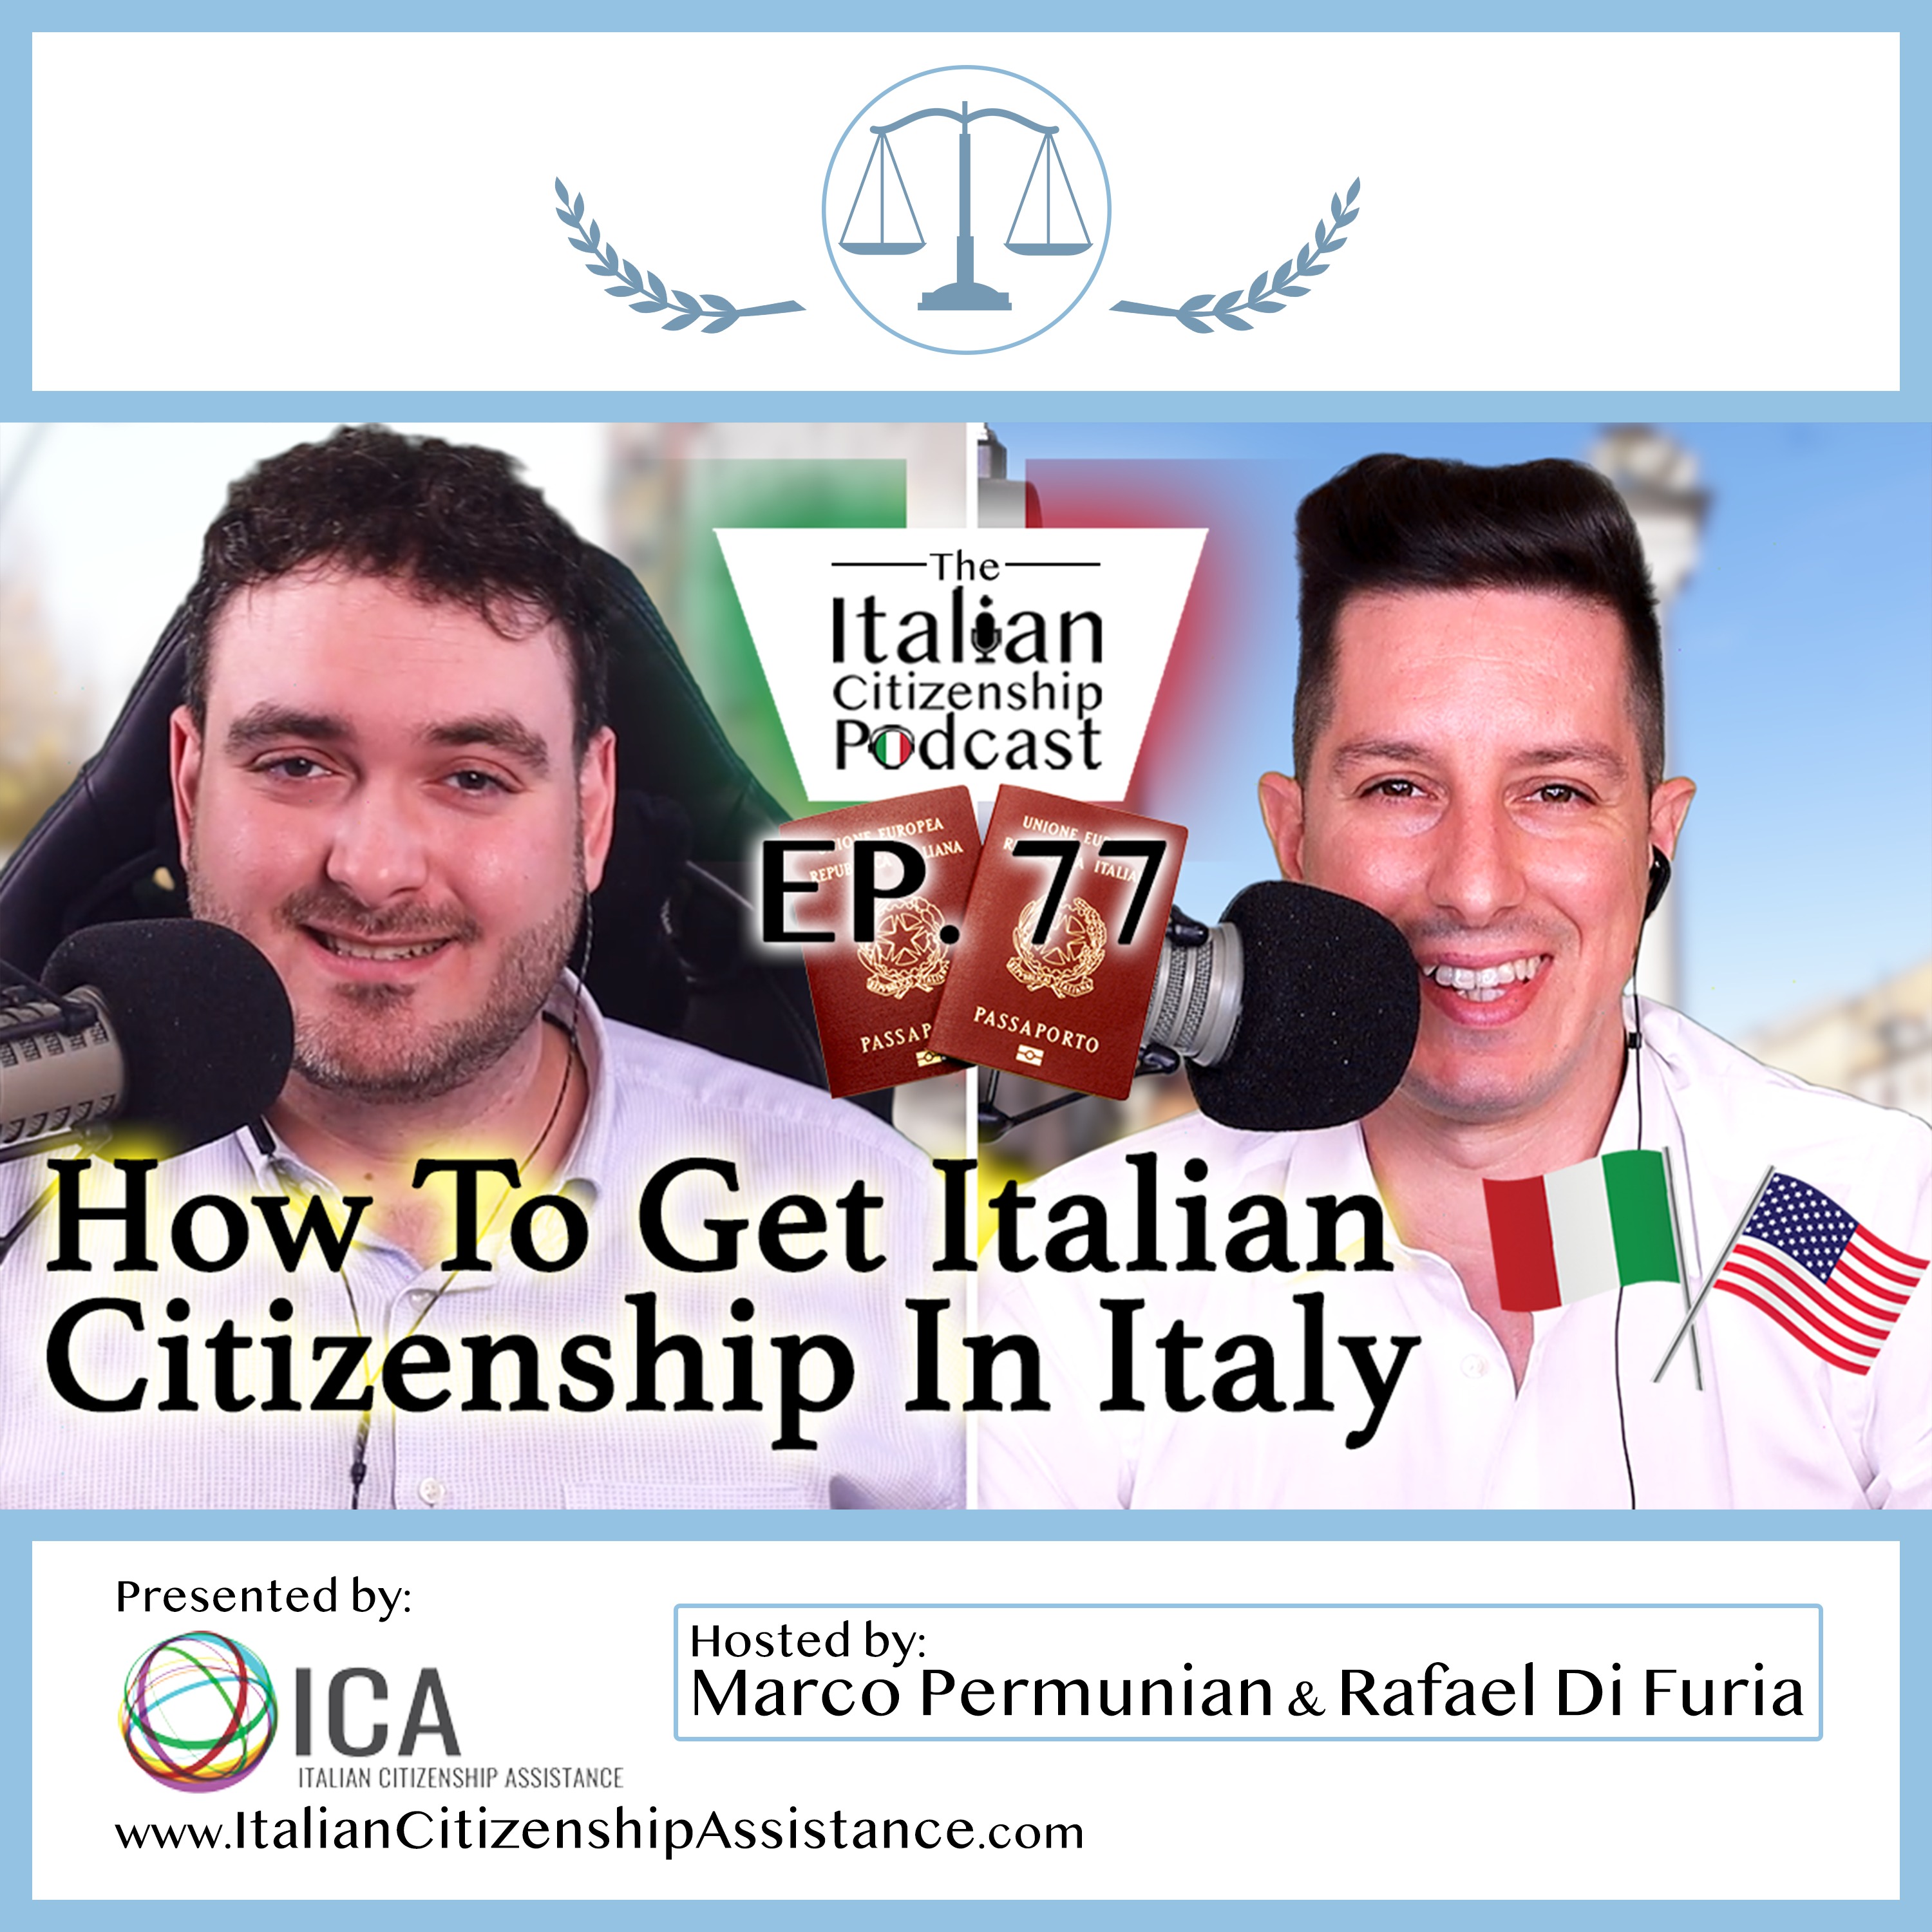 How to Get Italian Citizenship While Living in Italy